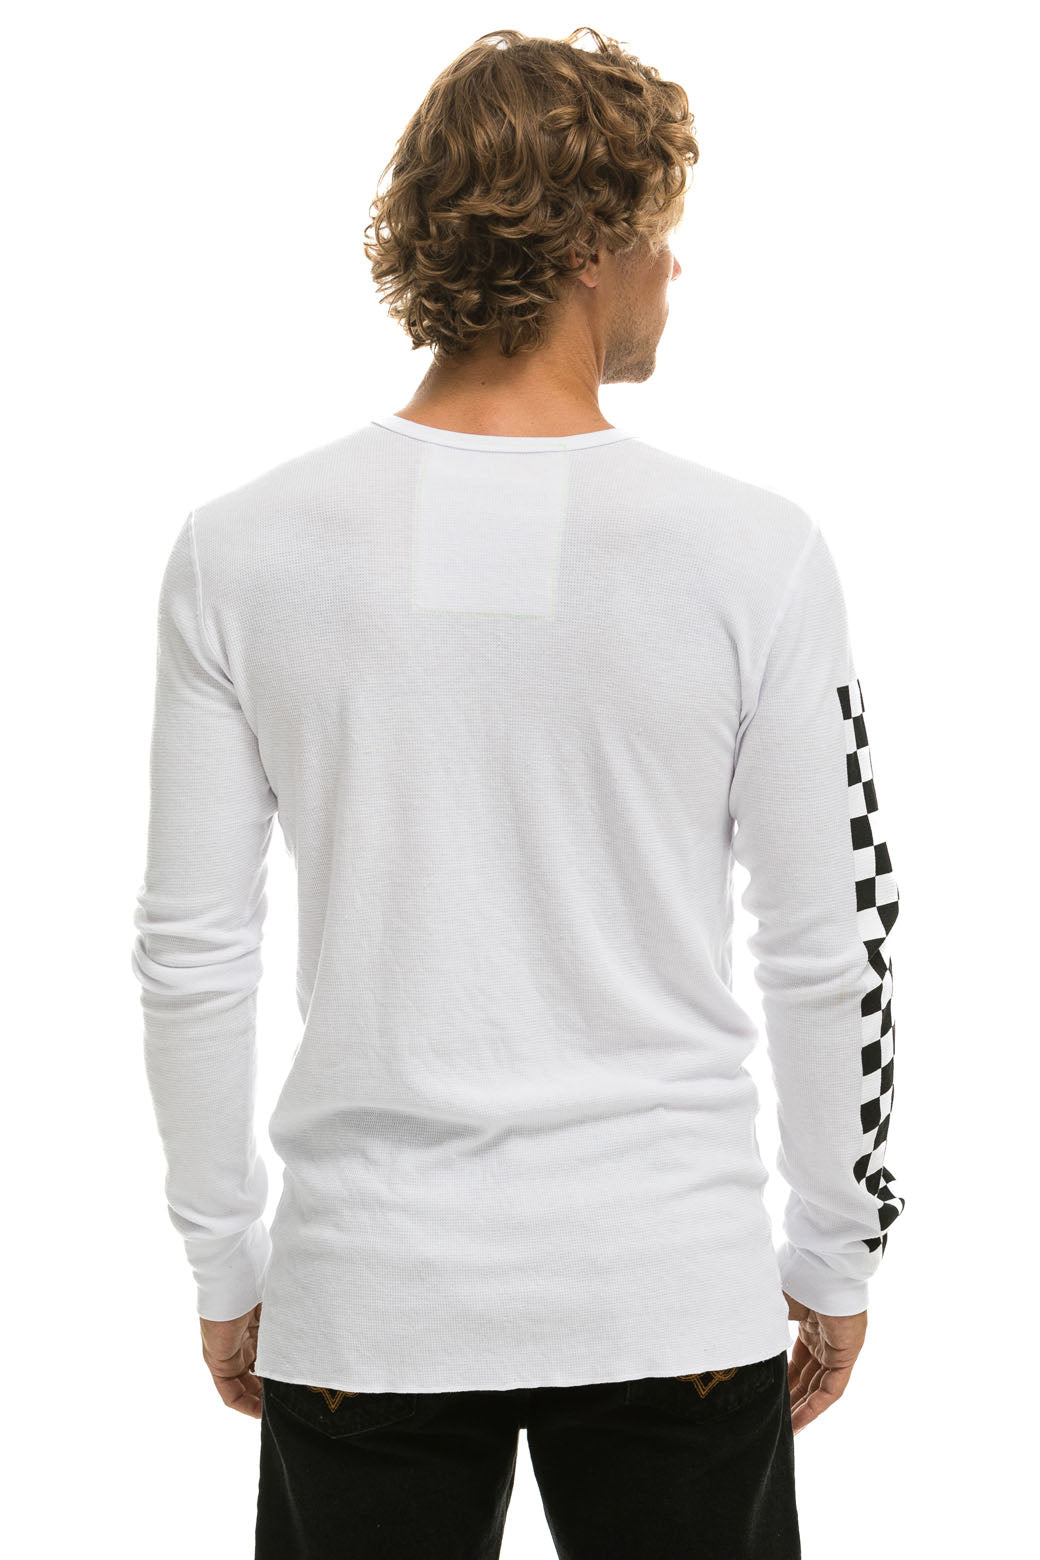 CHECK SLEEVE THERMAL - WHITE Thermal Aviator Nation 